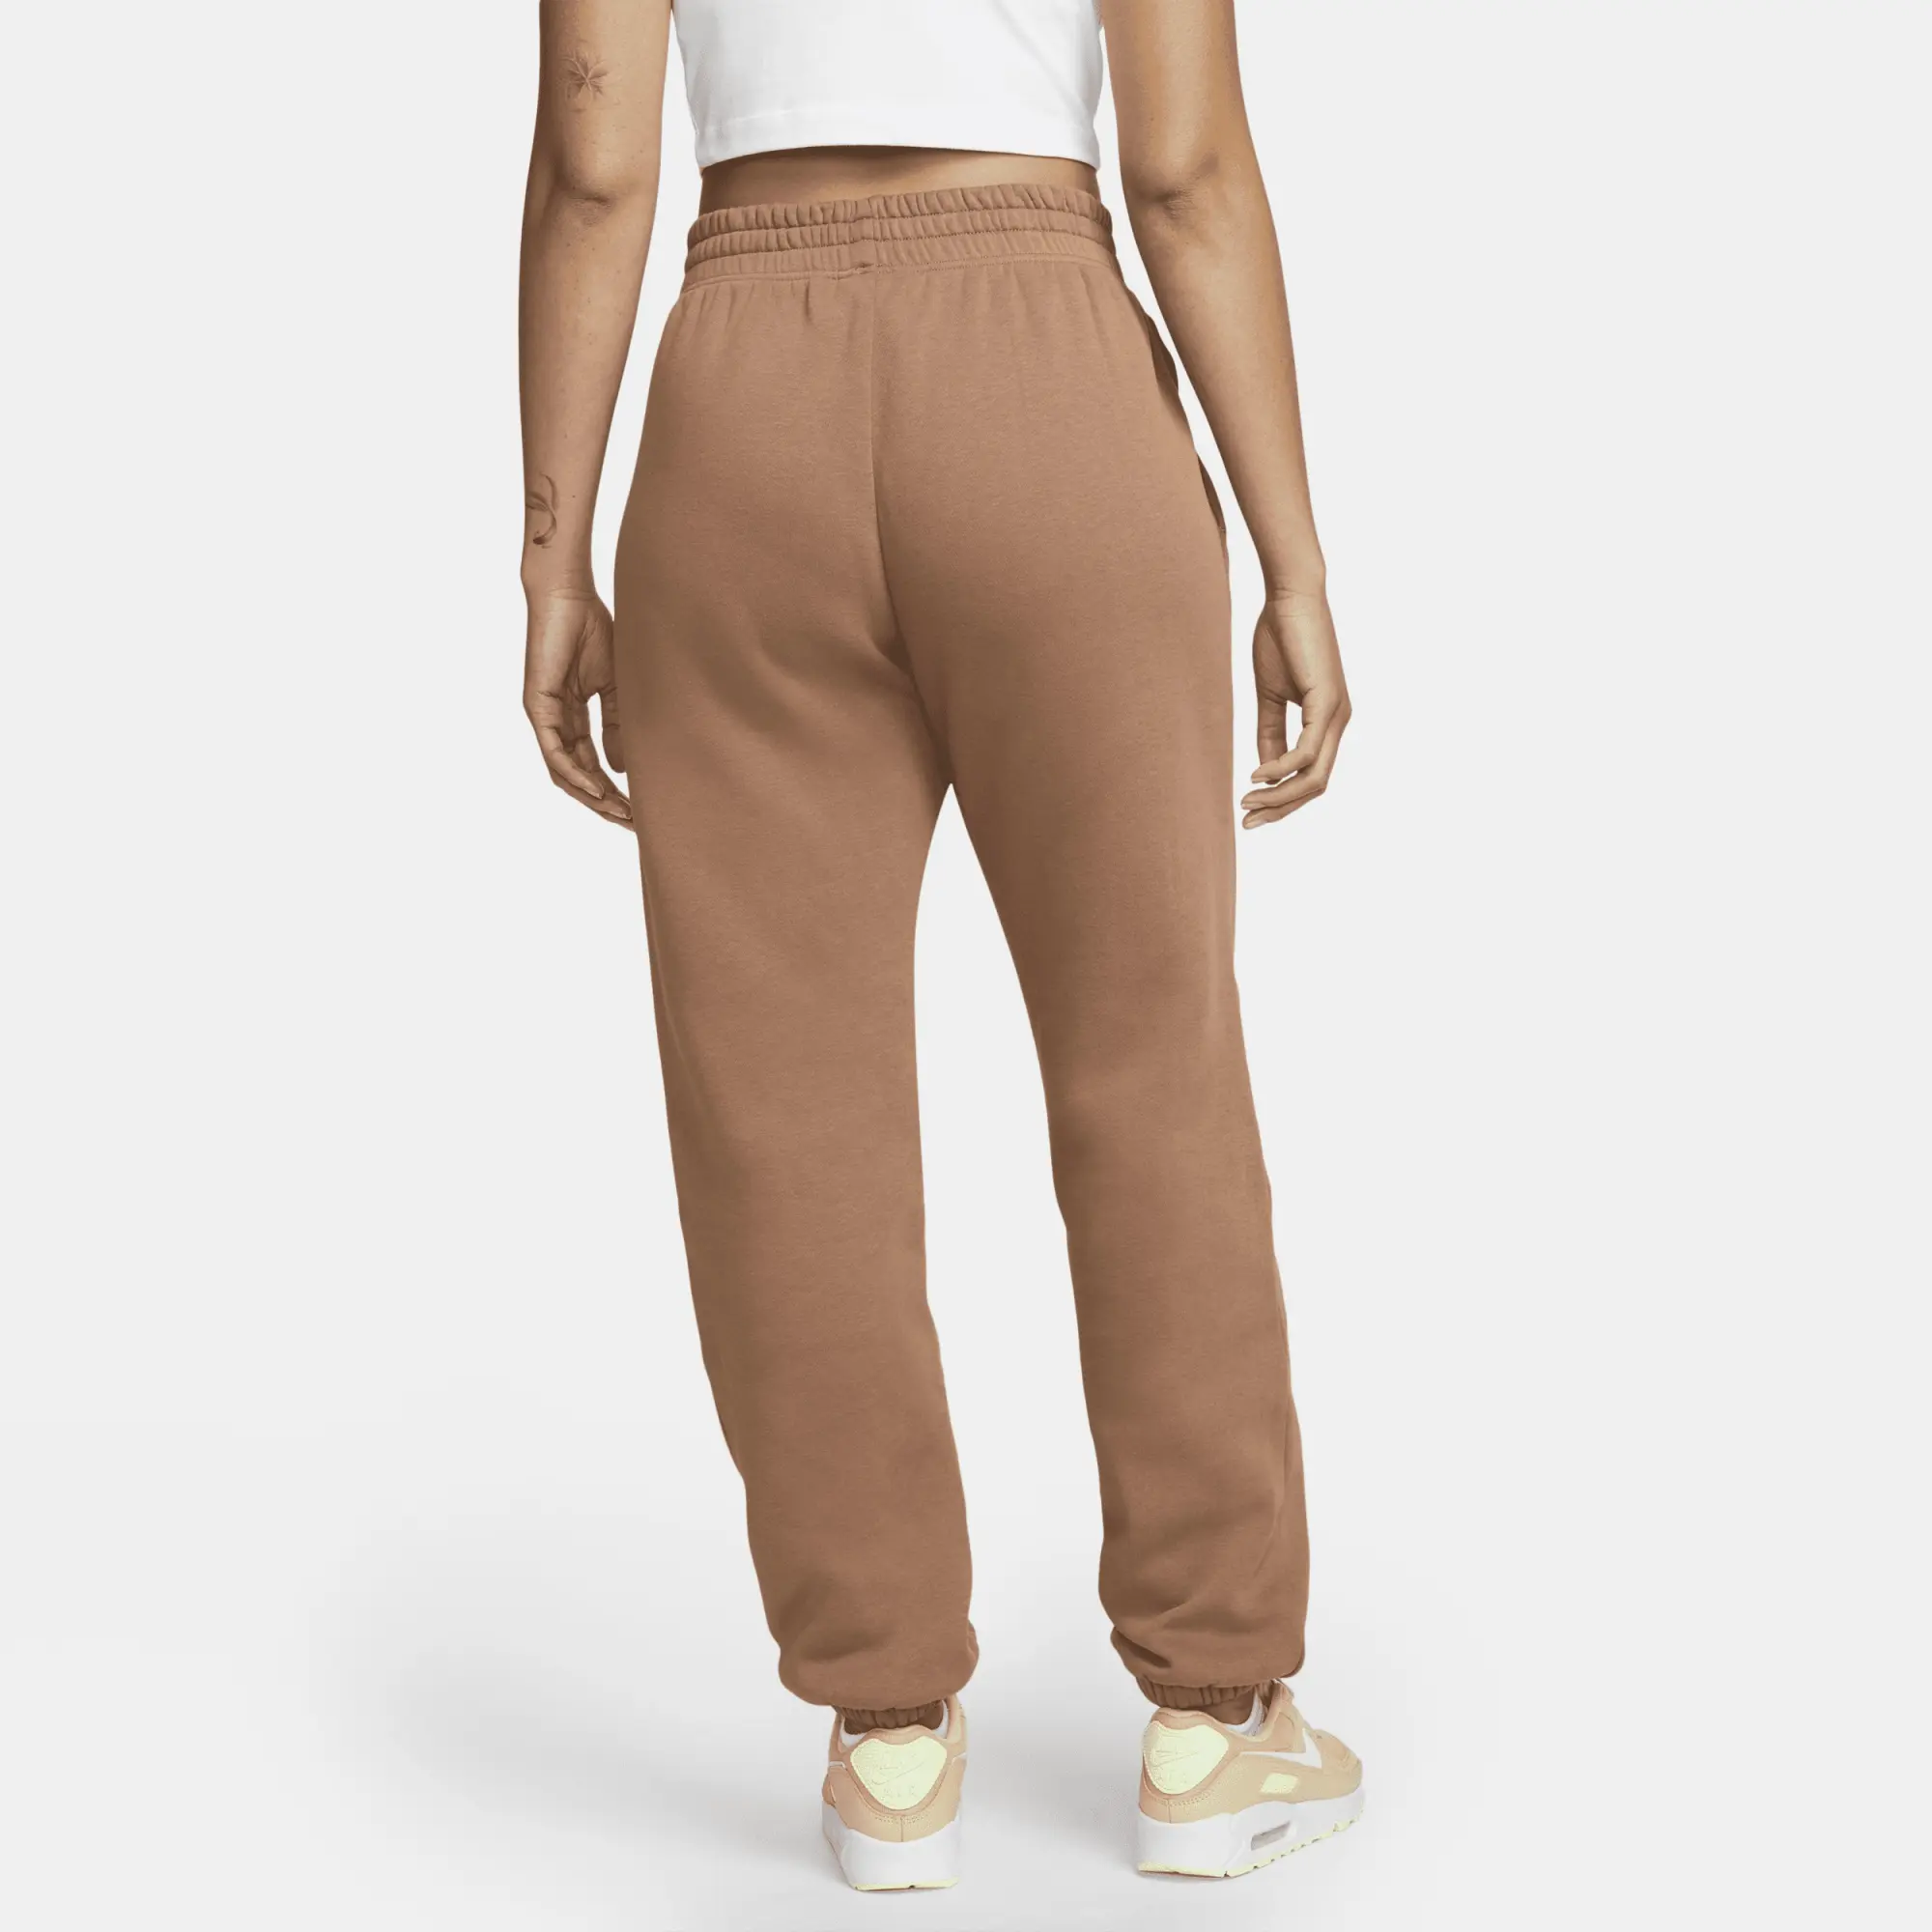 Nike Mini Swoosh Oversized Joggers In Mineral Clay-Pink, BV4089-215